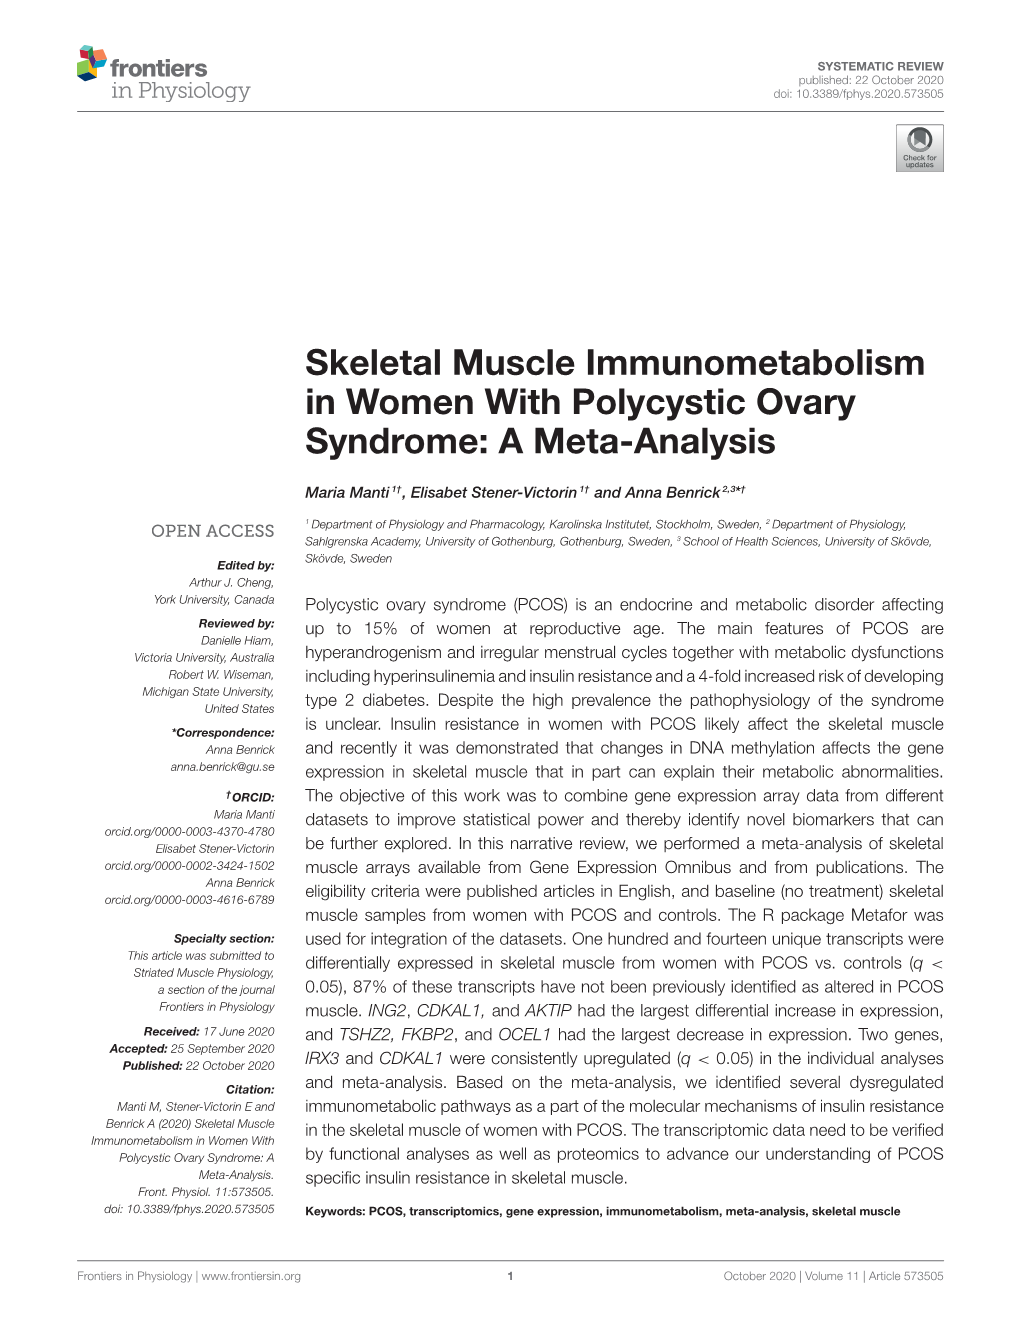 Skeletal Muscle Immunometabolism in Women with Polycystic Ovary Syndrome: a Meta-Analysis